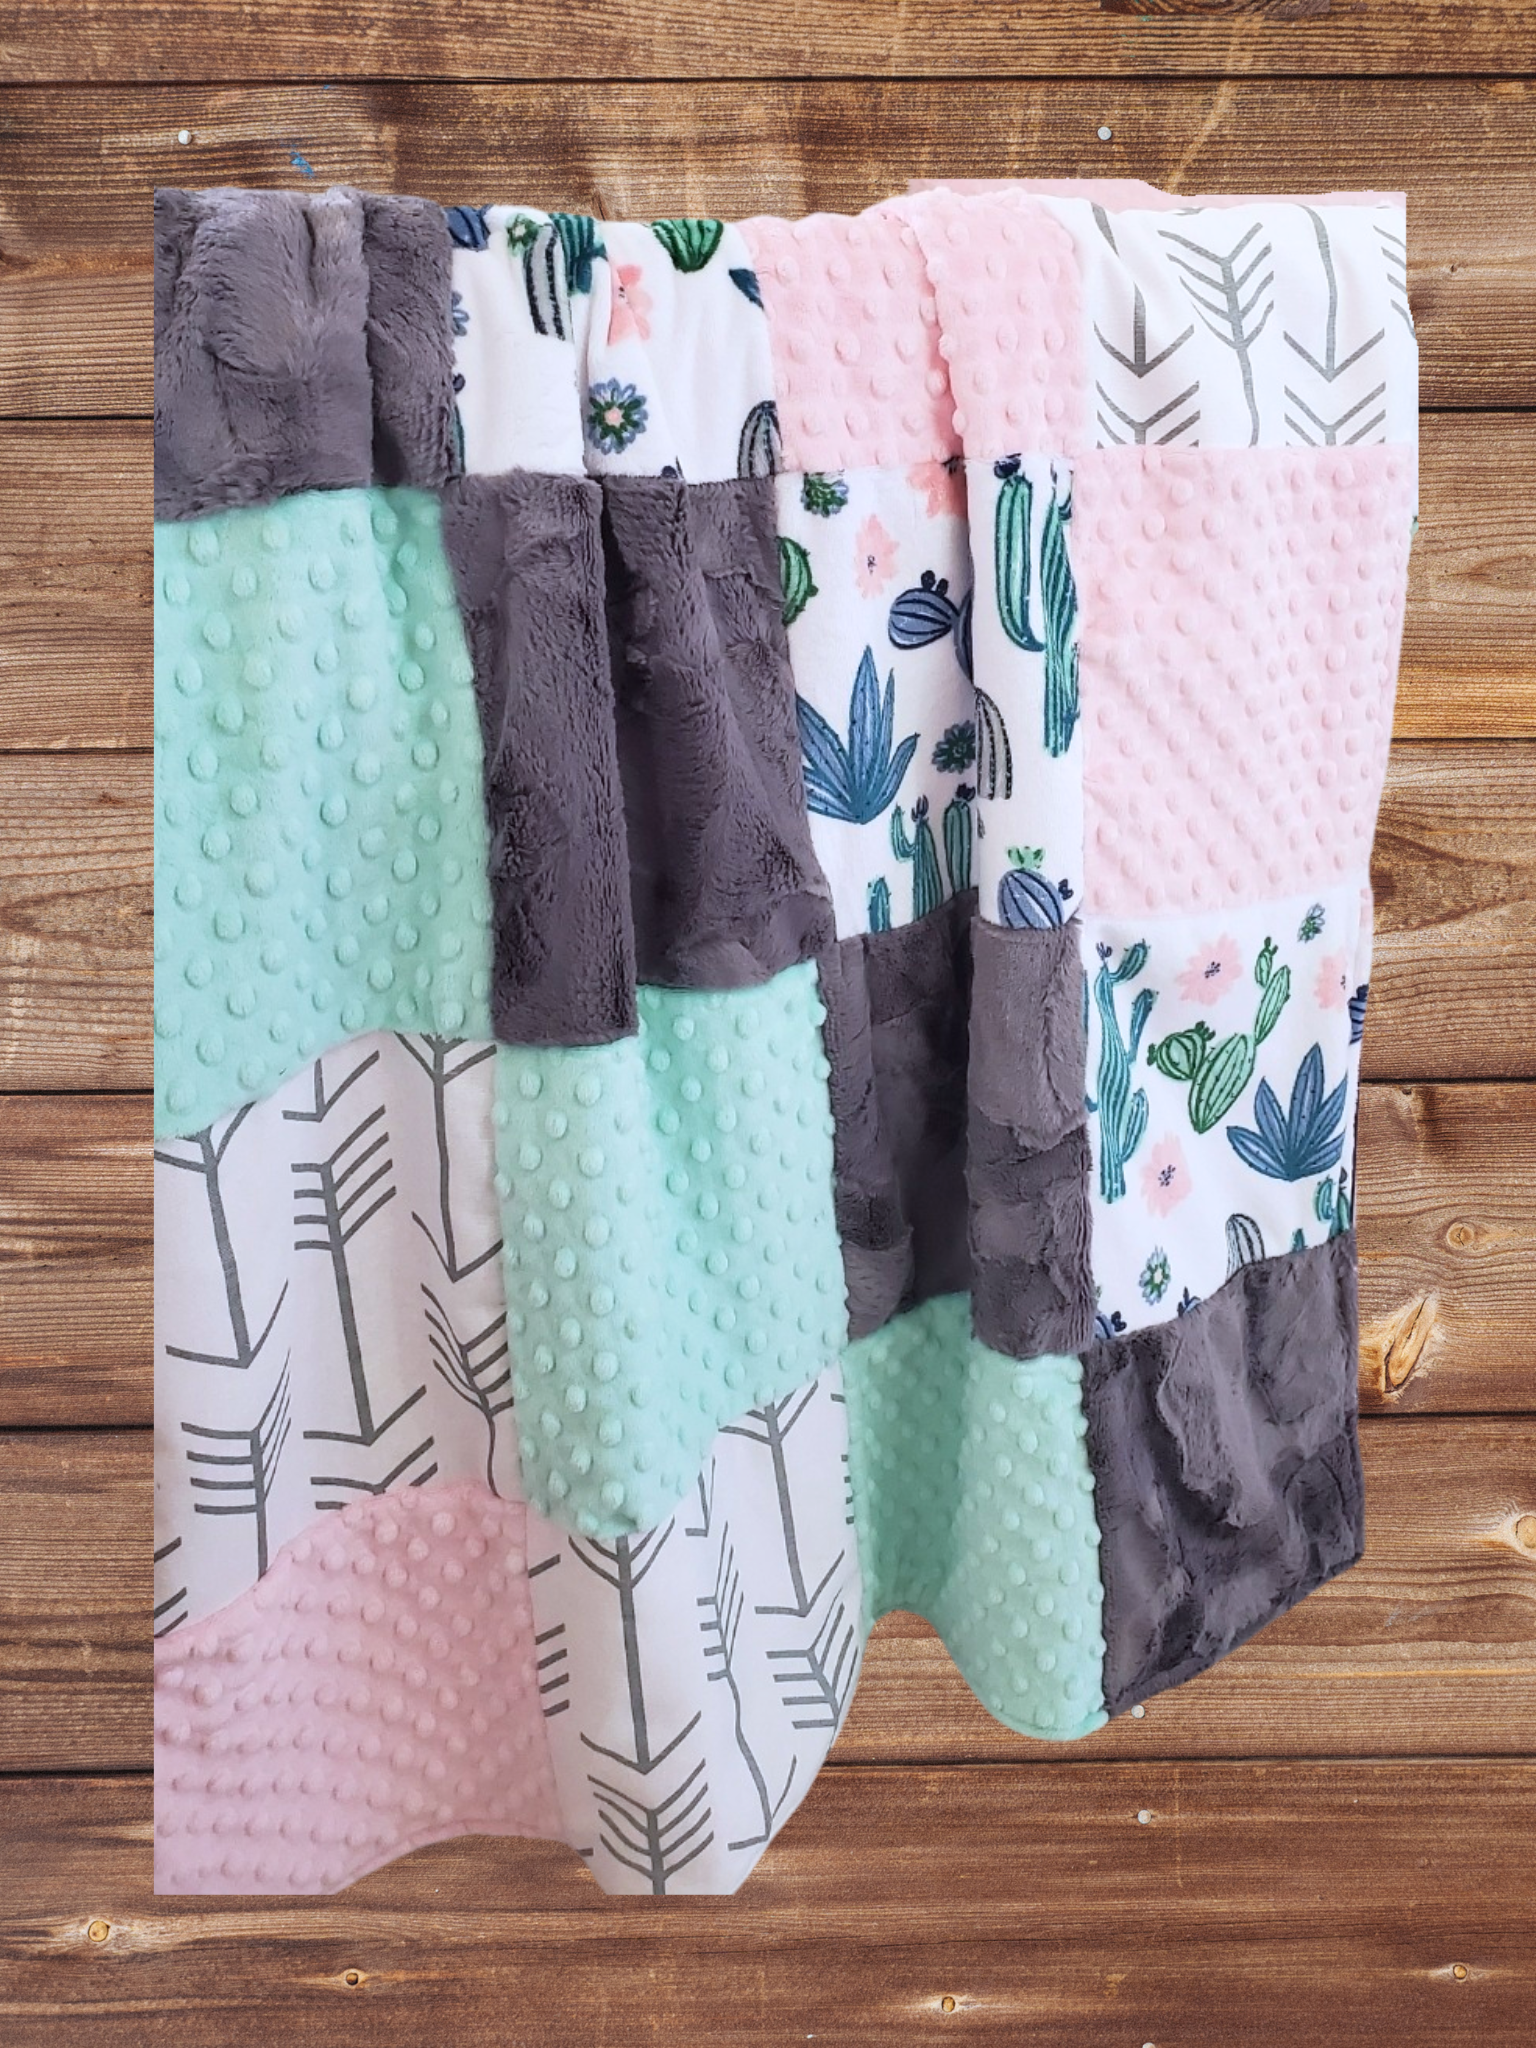 Patchwork Blanket - Cactus Minky and Arrows Blanket - DBC Baby Bedding Co 